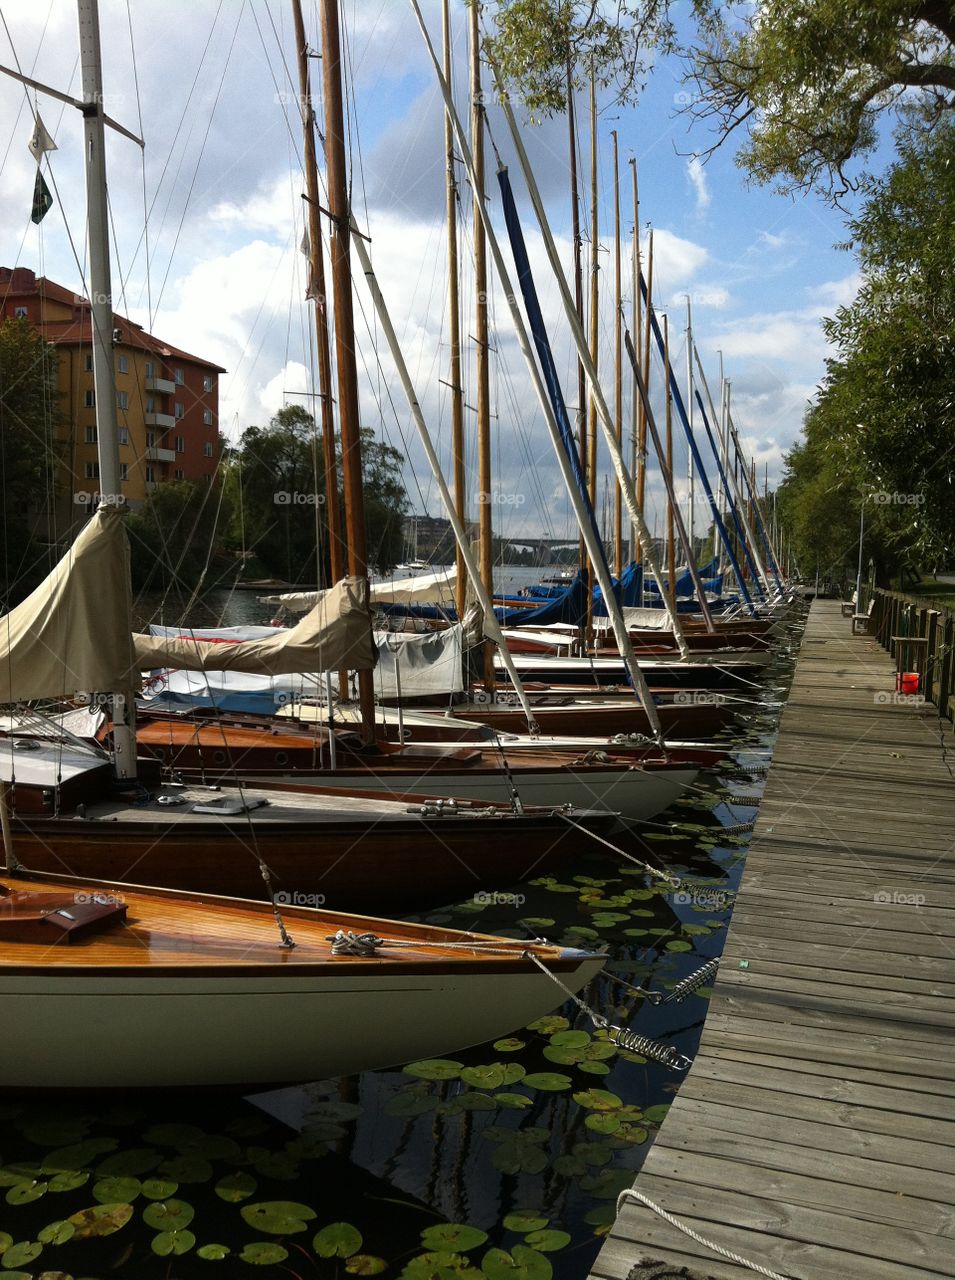 Sailboats at Långholmen Sweden. Longing back to summer when seeing these gorgeous boats in Stockholm, Sweden. 